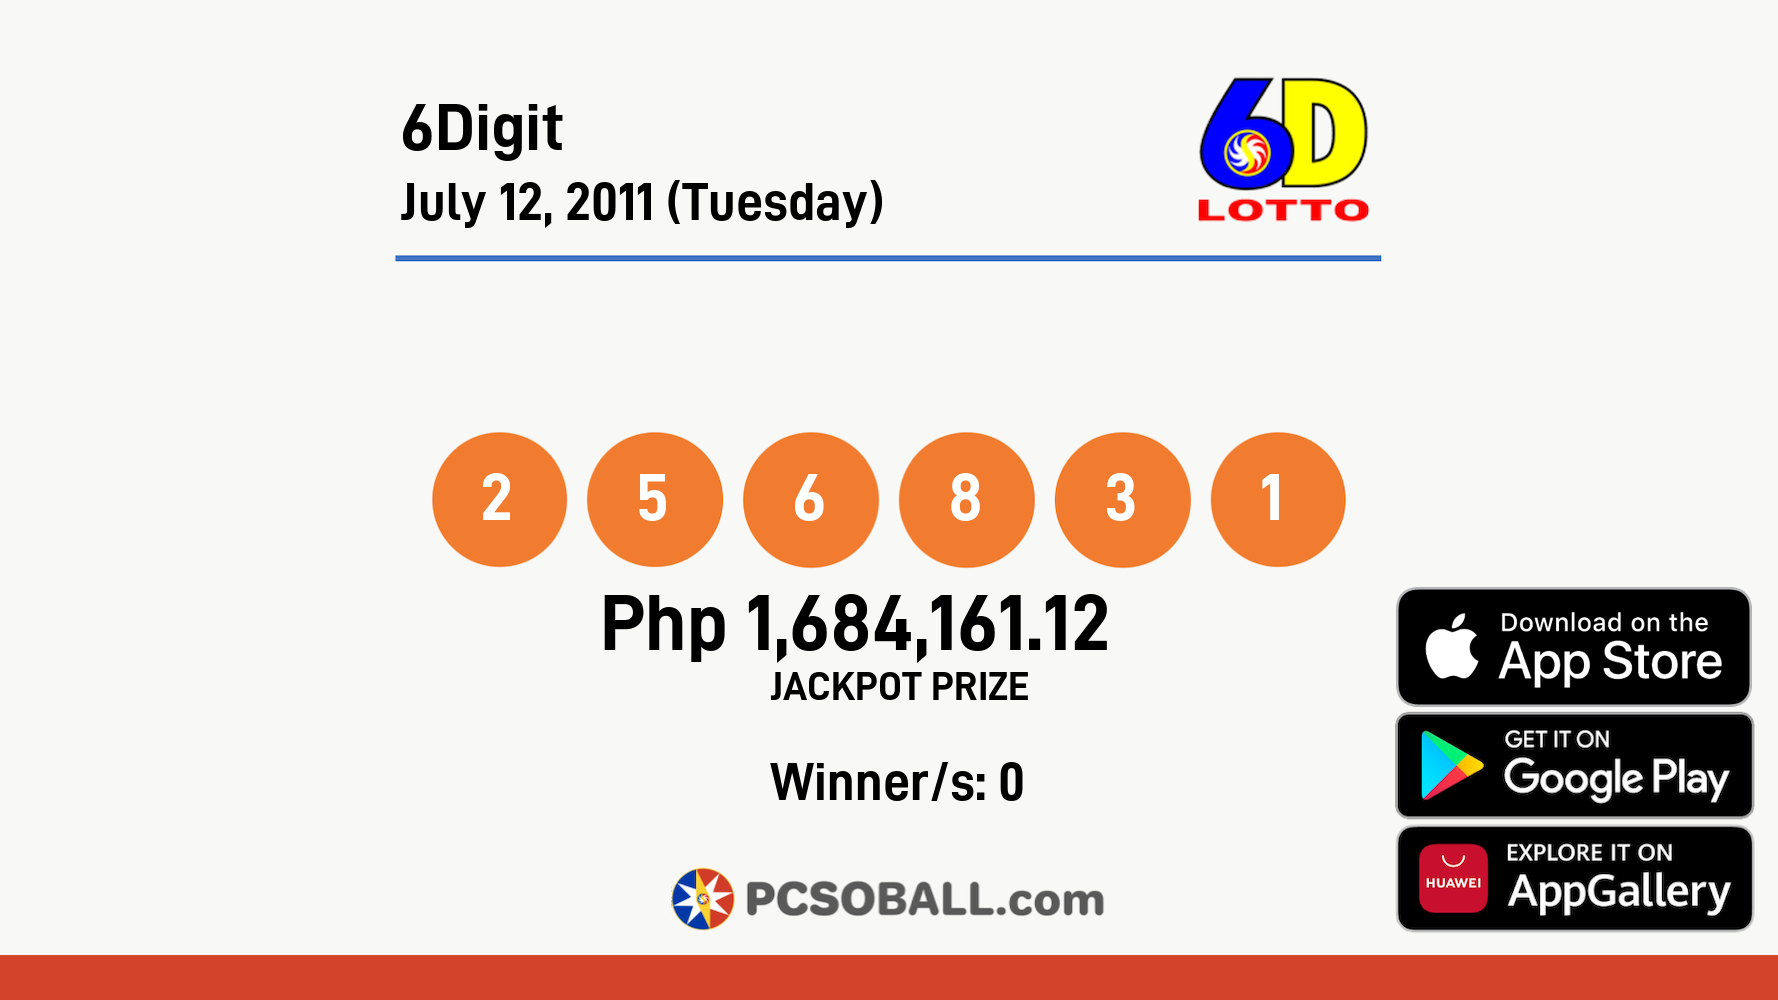 6Digit July 12, 2011 (Tuesday) Result